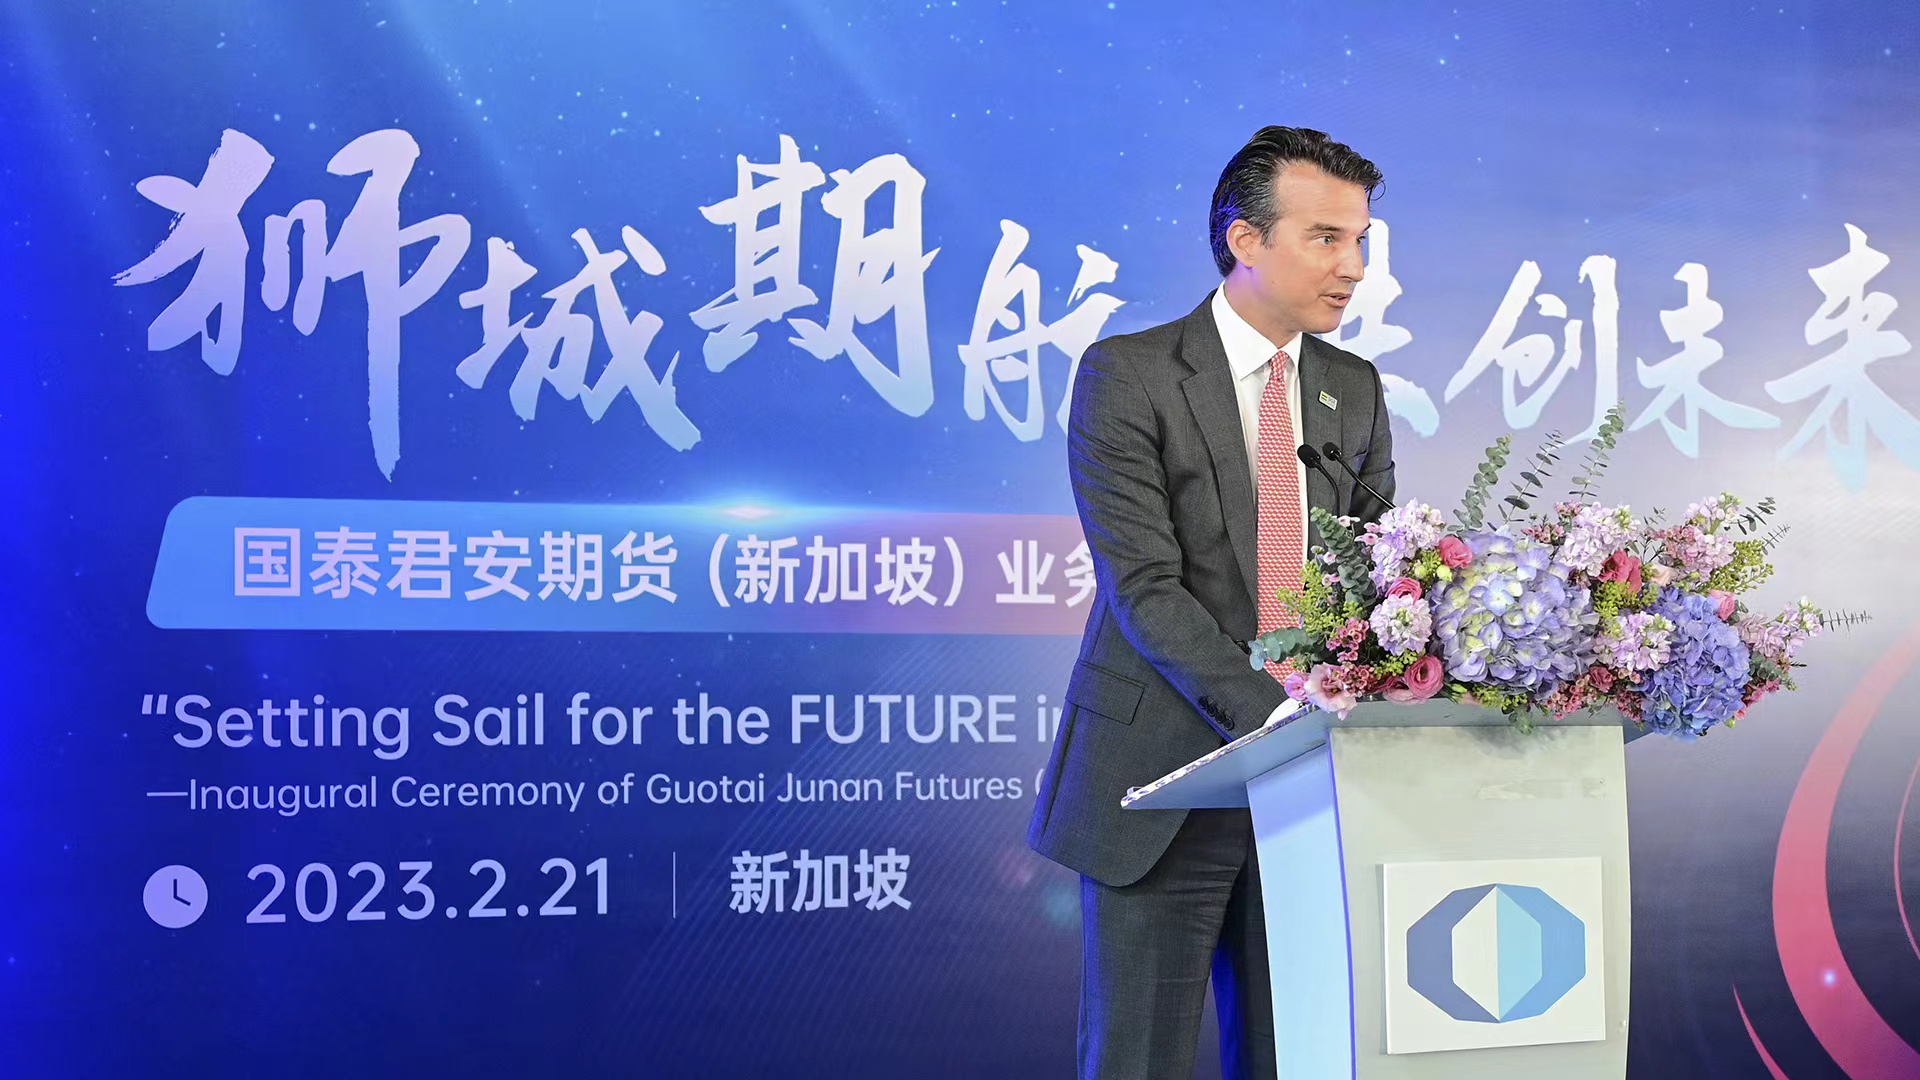 Guotai Junan Futures Singapore Co., Ltd. started its business operation and signed strategic cooperation with Bank of China Singapore Branch and Shengbao Bank ...401 / author:Guotai Jun'an / source:Guotai Jun'an